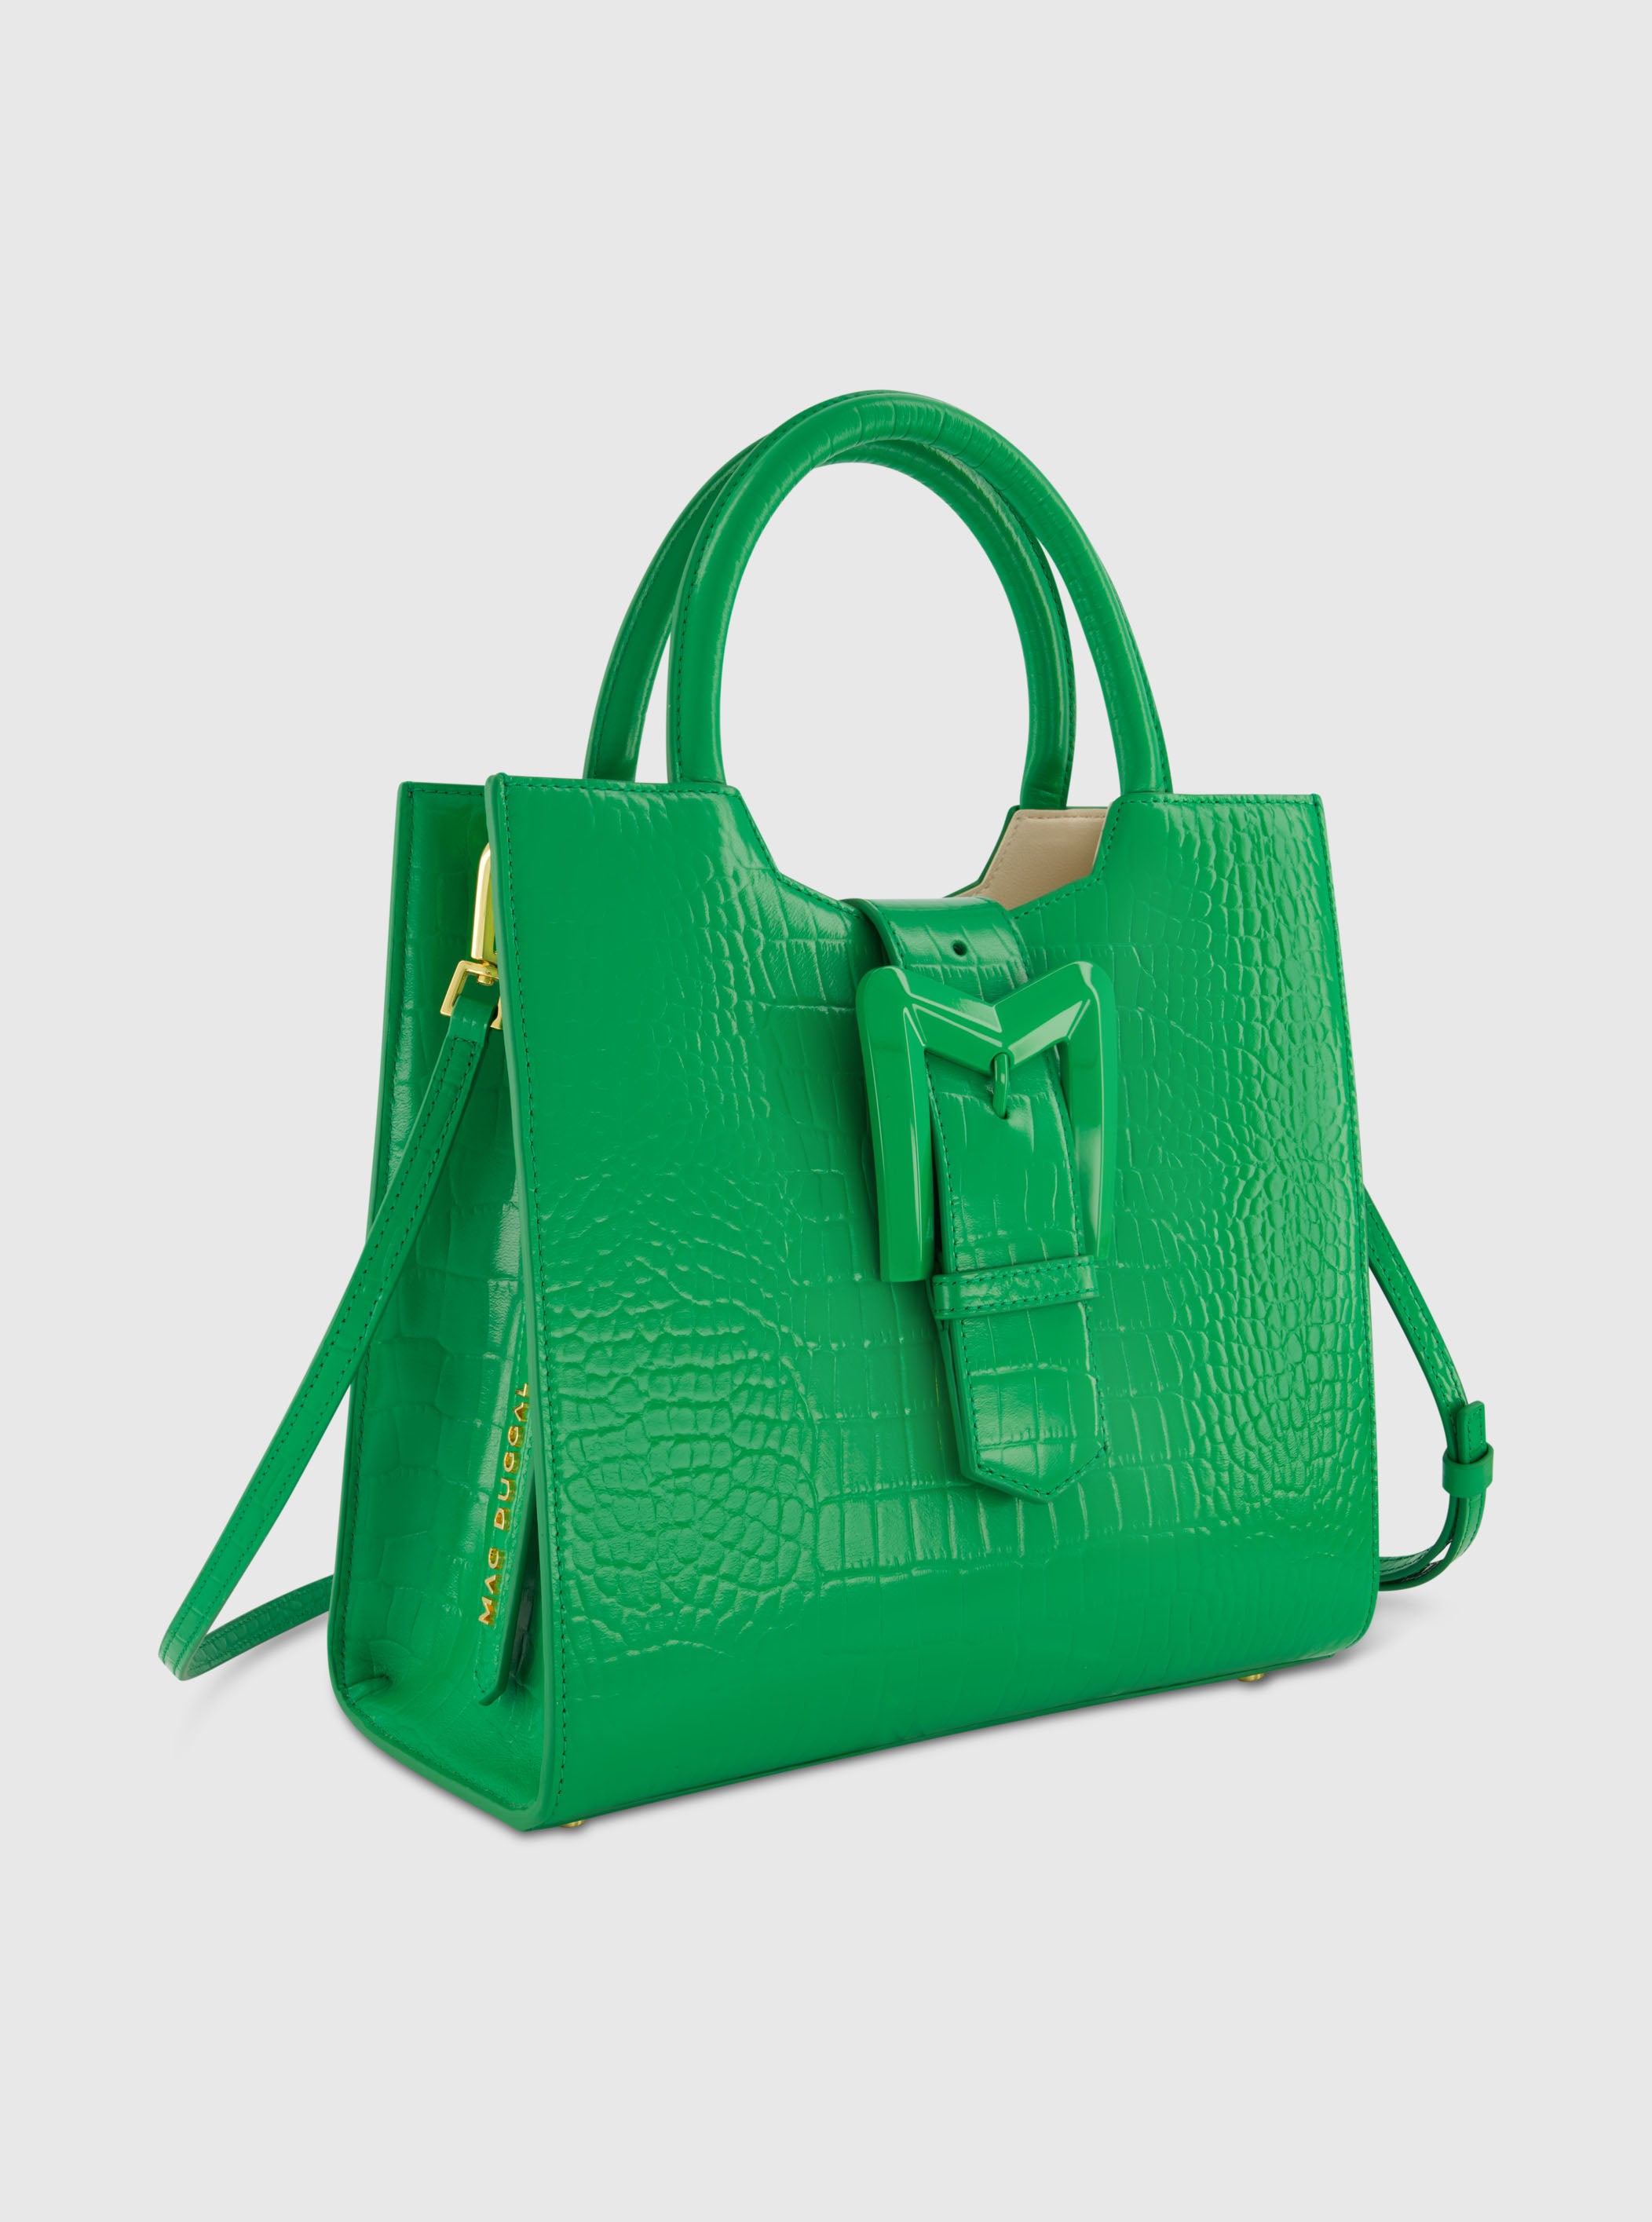 Buckled Medium Croco Green Leather Tote Bag with Detachable Strap